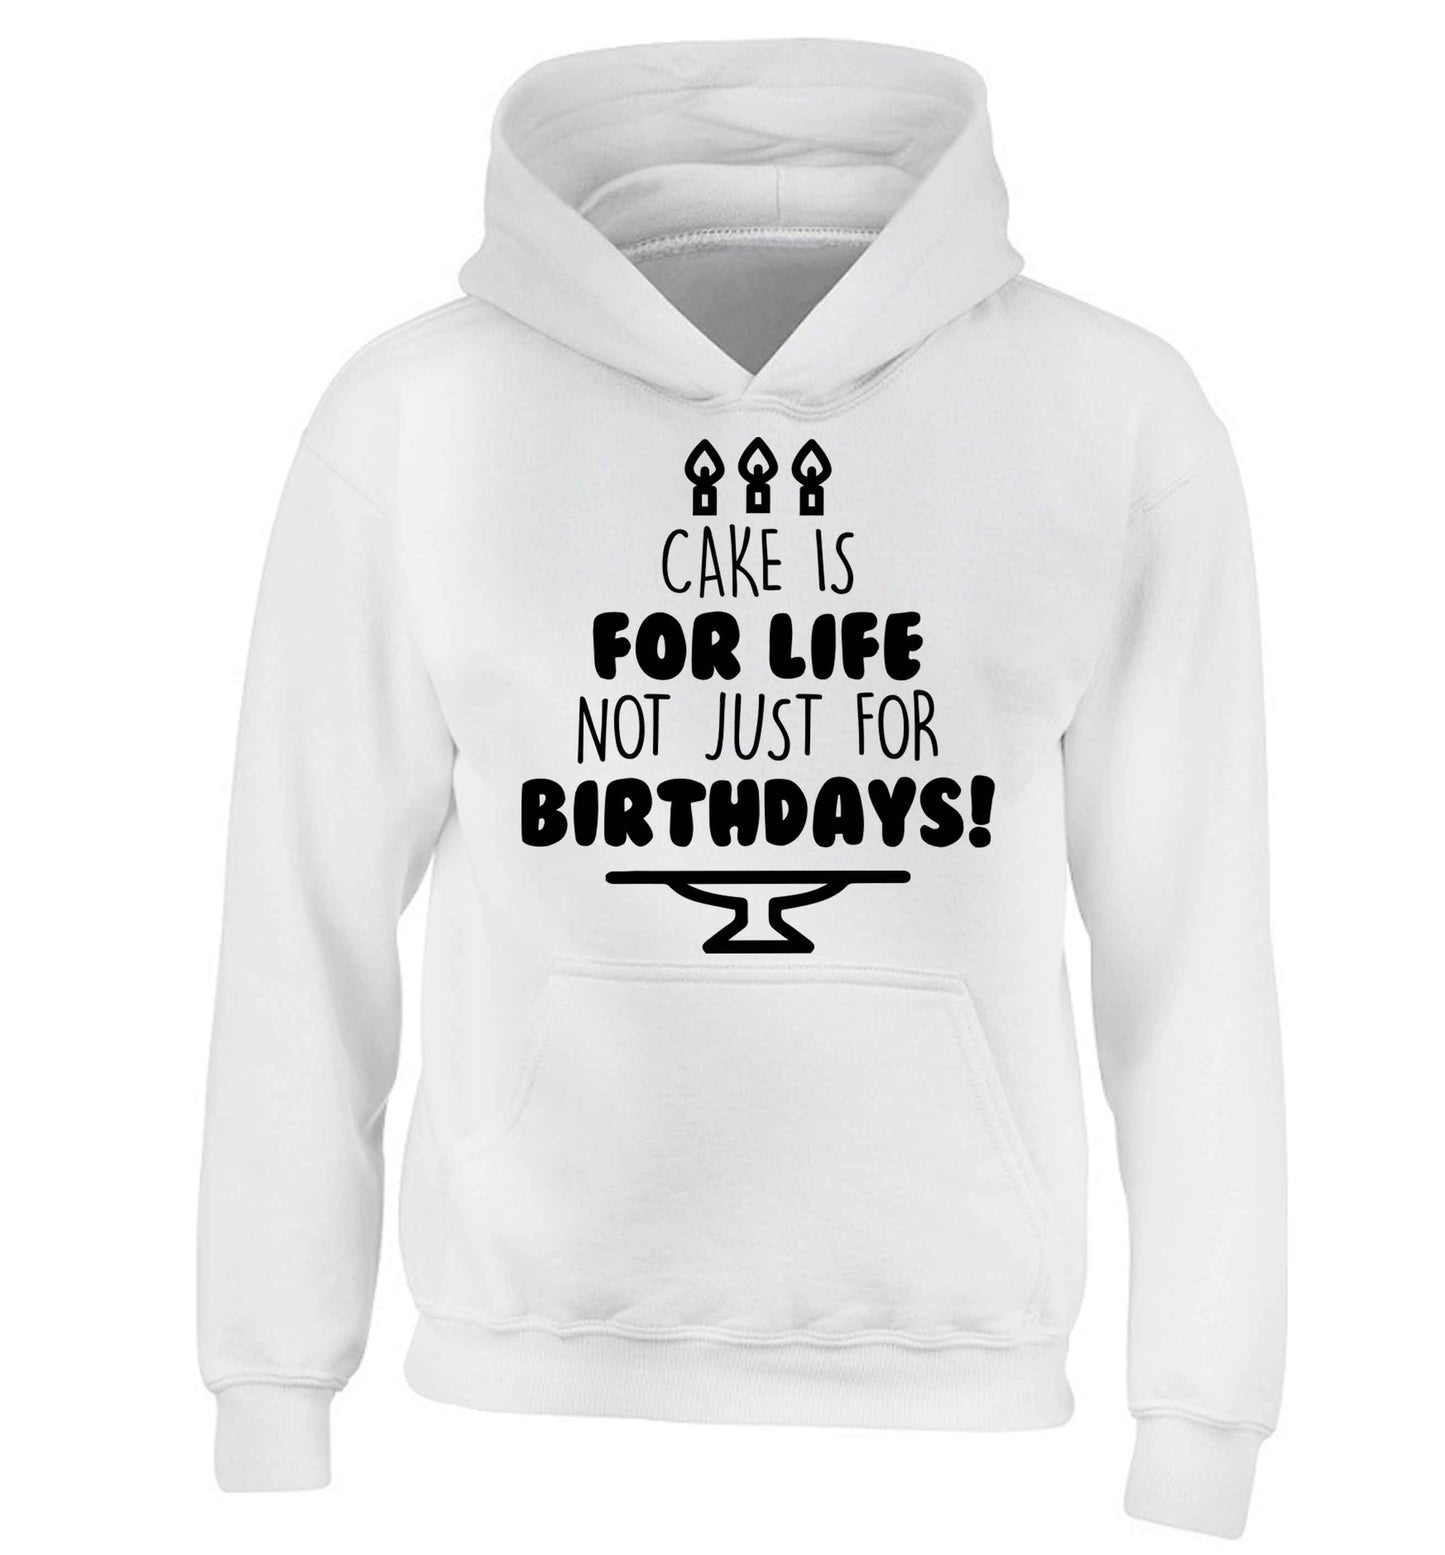 Cake is for life not just for birthdays children's white hoodie 12-13 Years